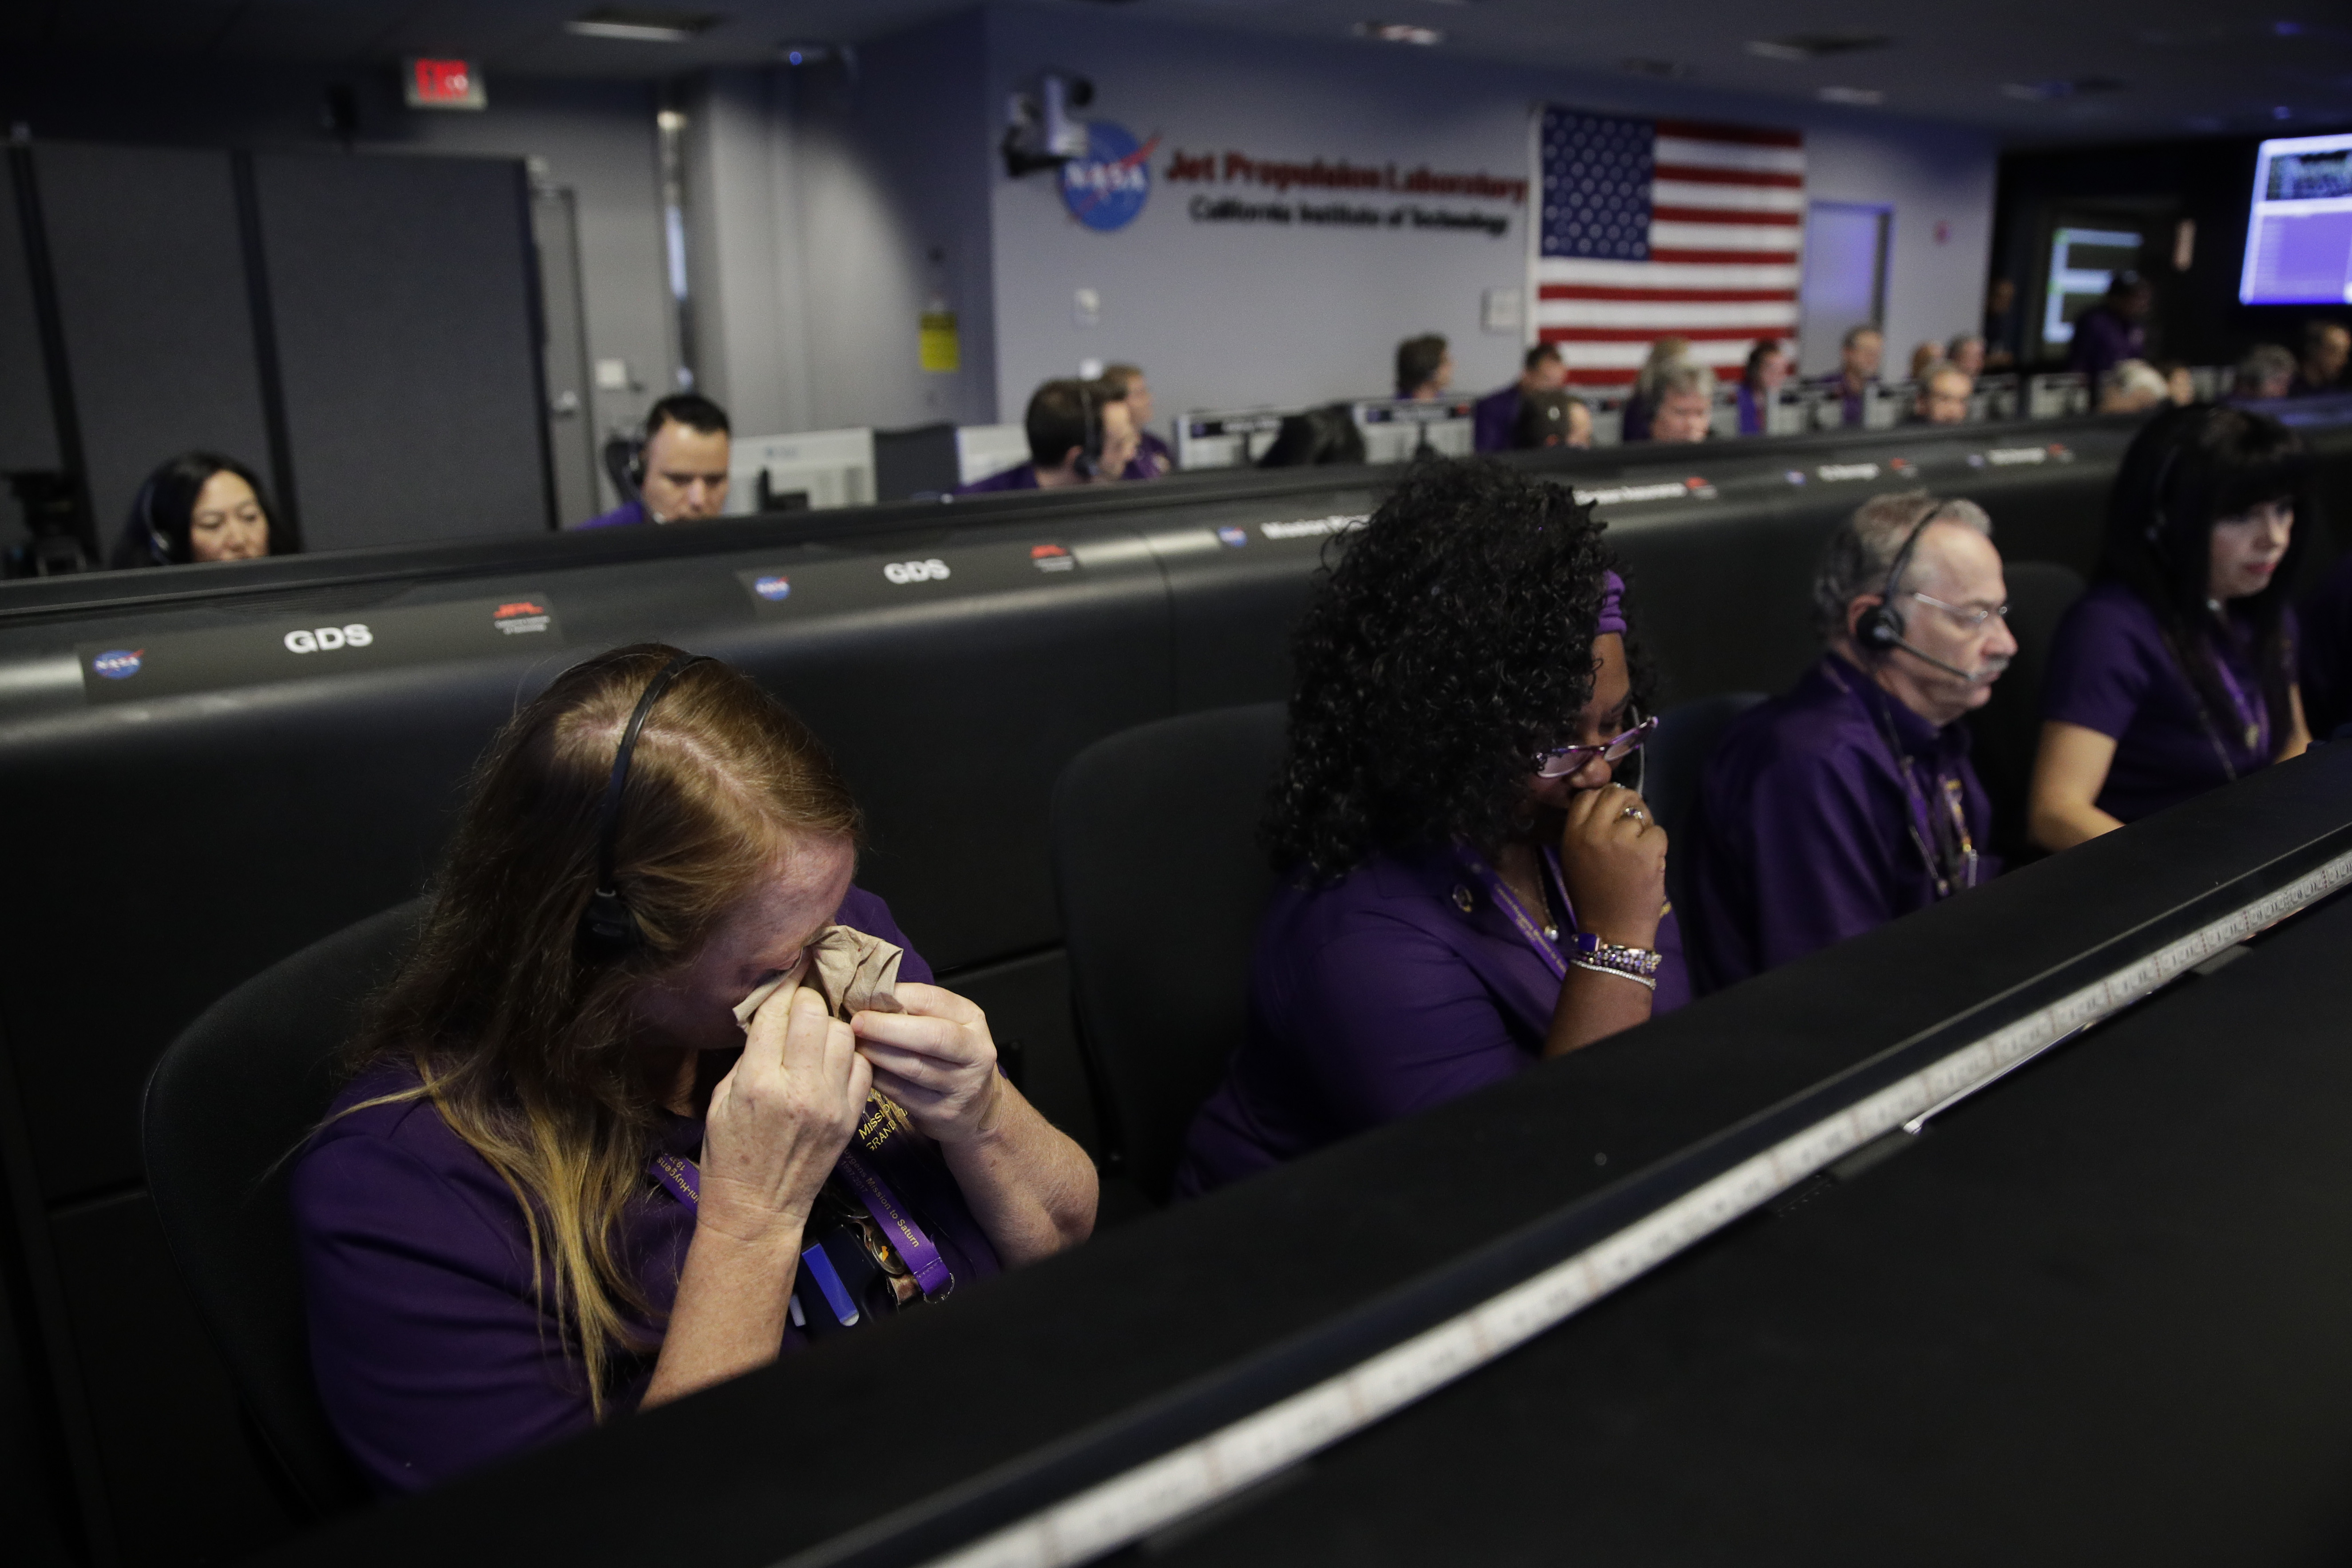 Engineer Nancy Vandermay, left, wipes her tears in mission control at NASA's Jet Propulsion Laboratory after confirmation of Cassini's demise Friday, Sept. 15, 2017, in Pasadena , Calif. Cassini disintegrated in the skies above Saturn early Friday, following a remarkable journey of 20 years. (AP Photo/Jae C. Hong, Pool)